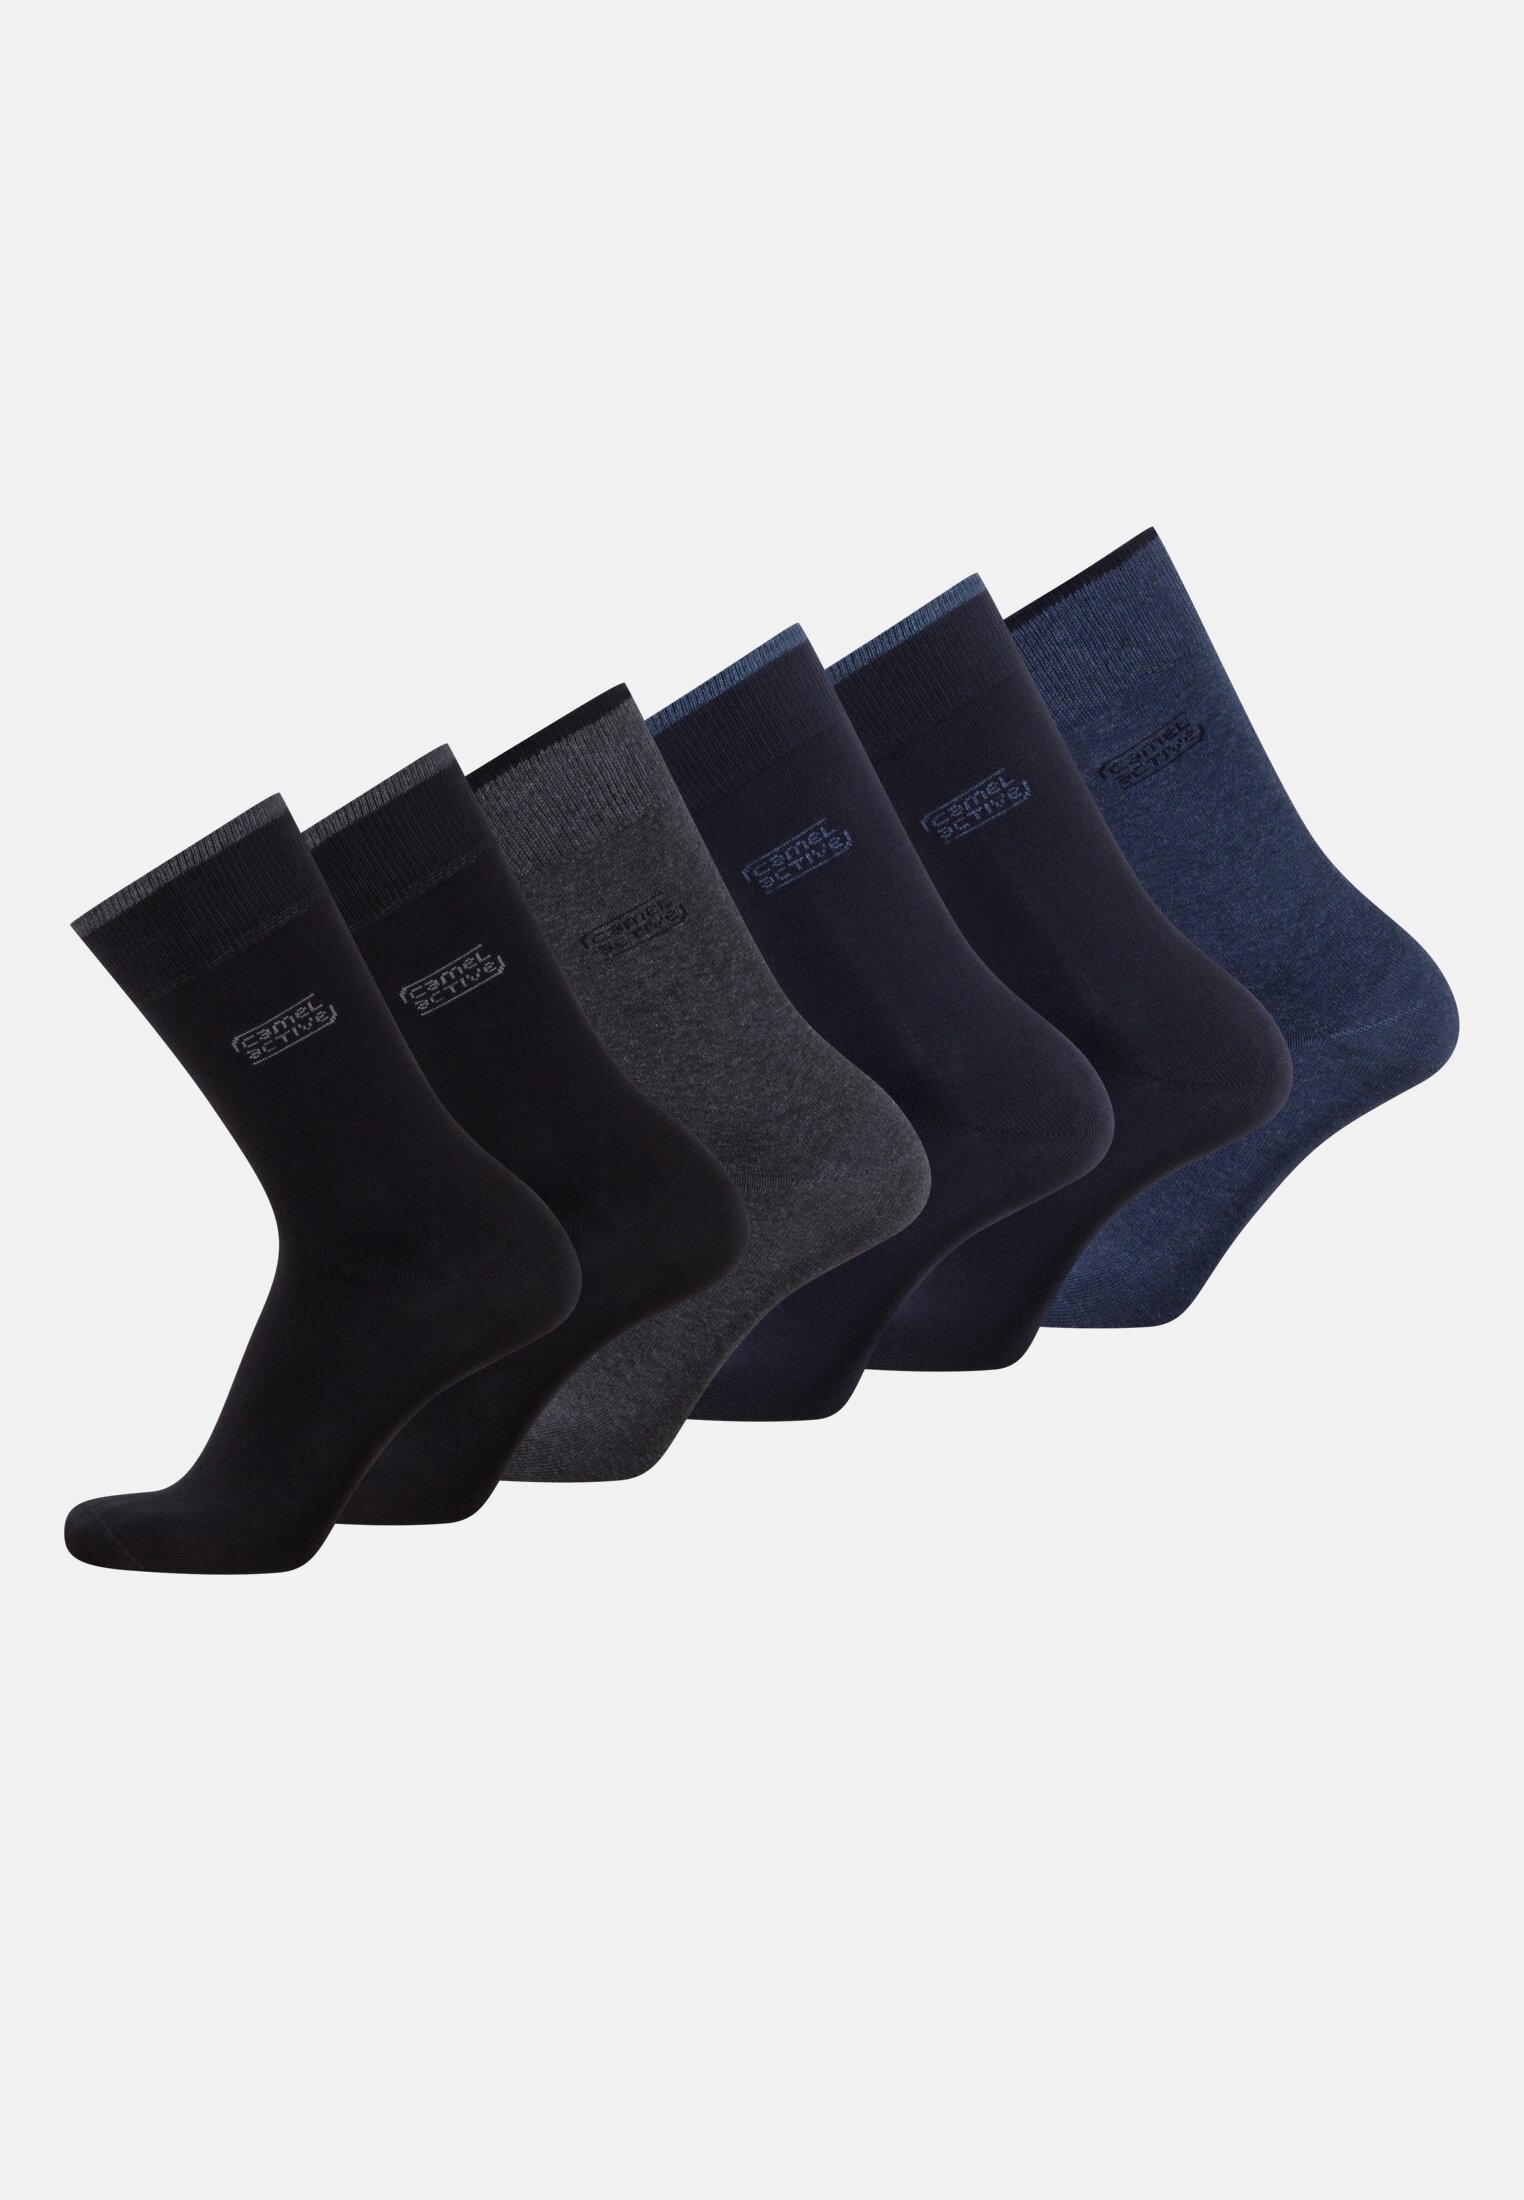 Camel Active Cotton socks in a pack of 6